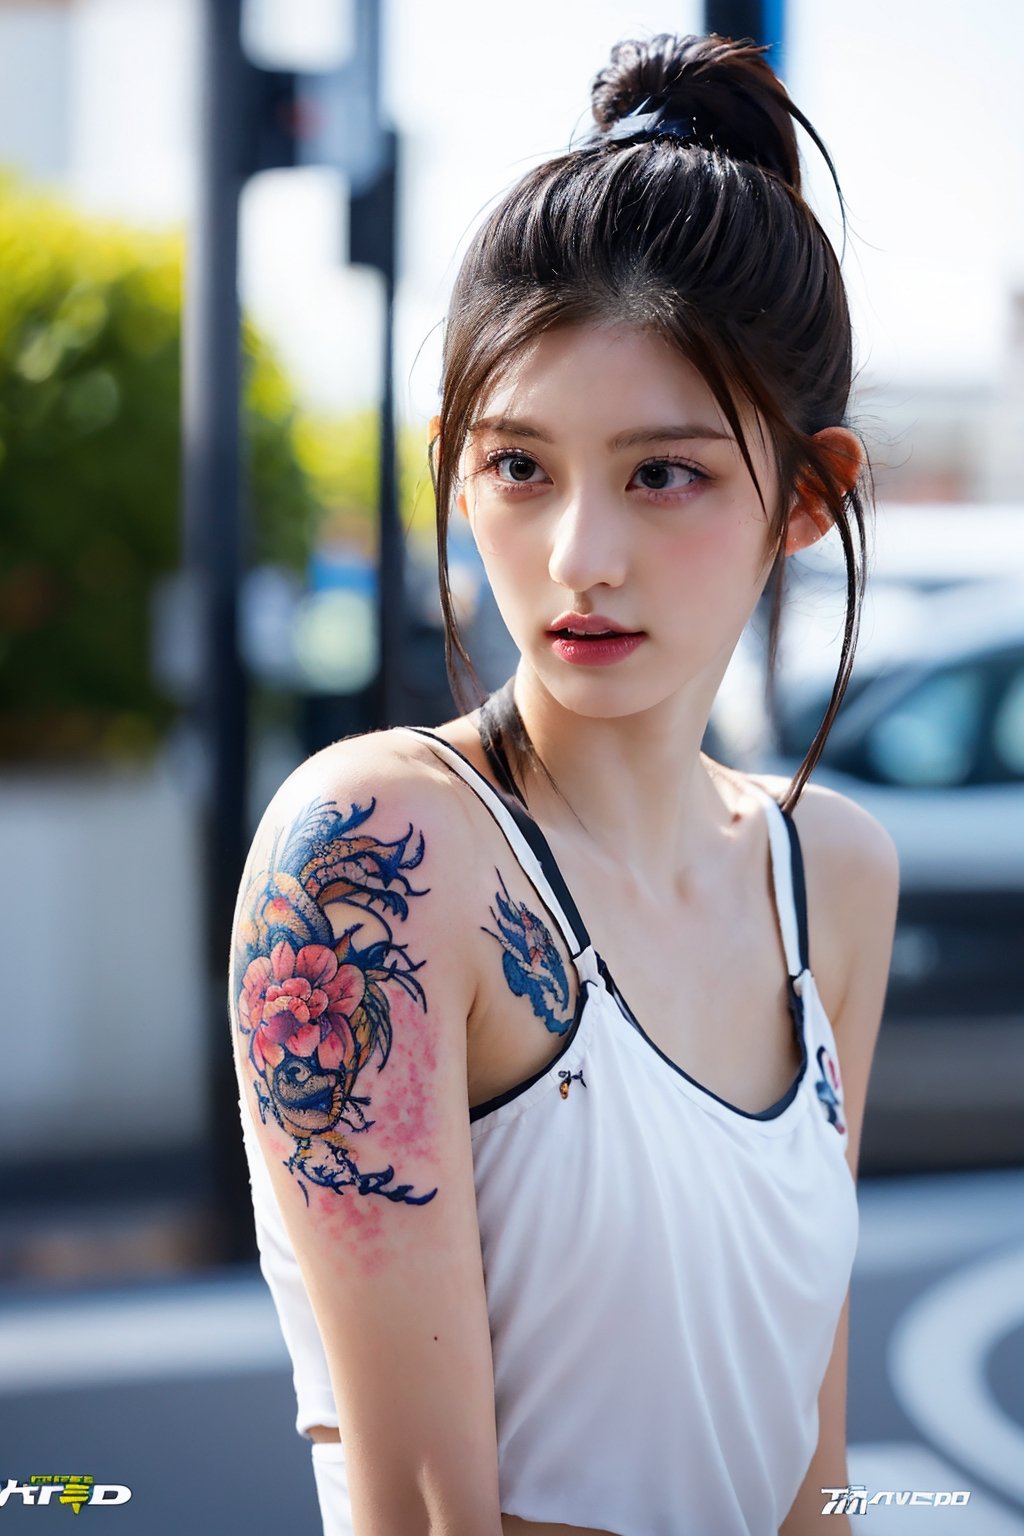 post created by Tattoo_girl